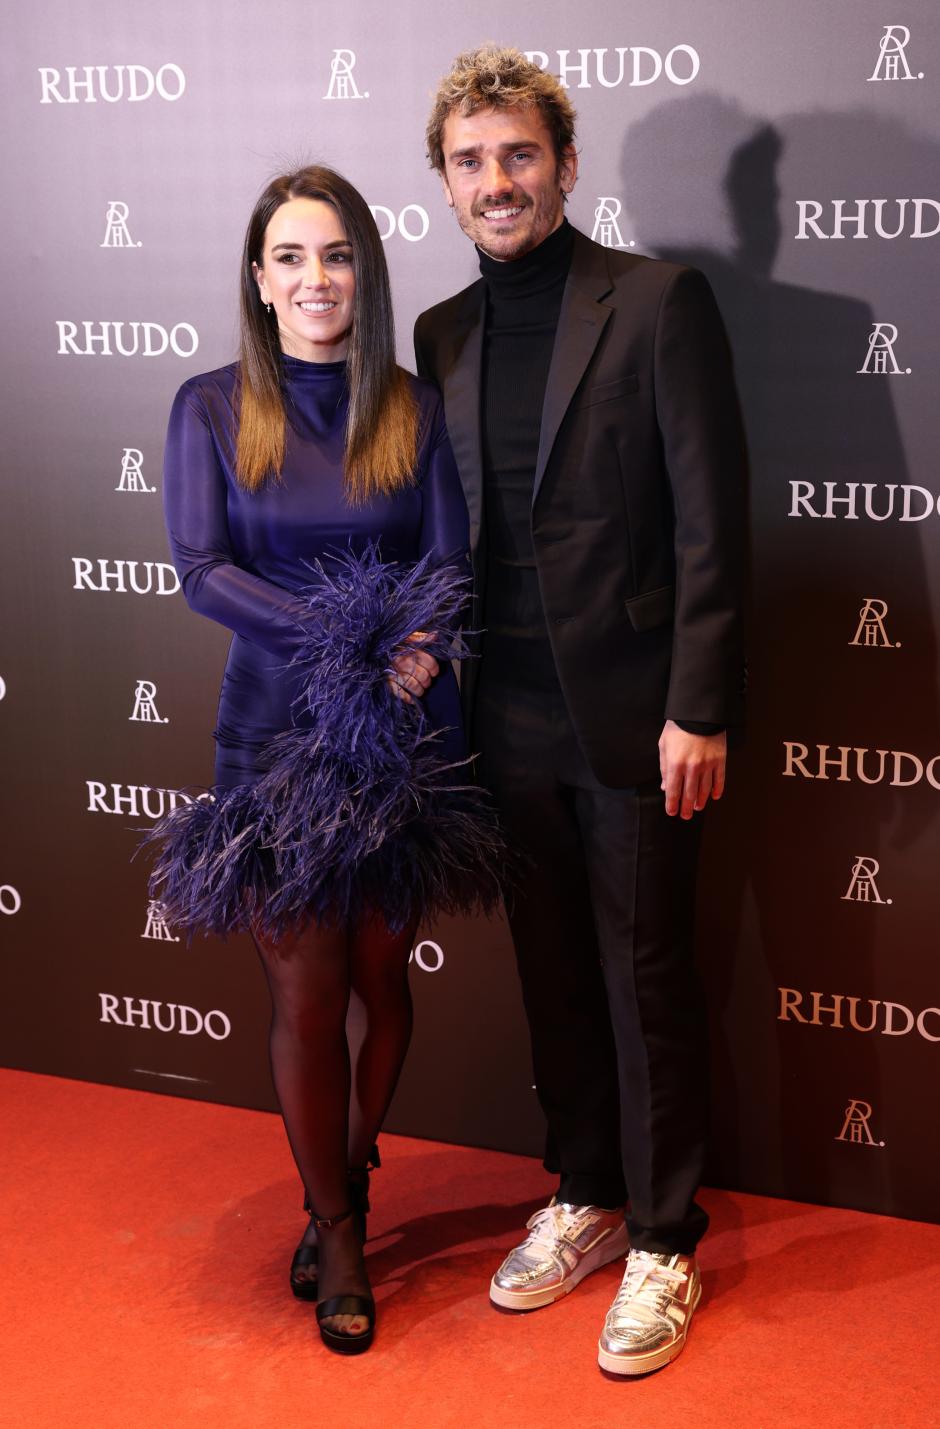 Soccerplayer Antoine Griezmann and Erika Choperena at photocall for presentation of Rhudo in Madrid on Monday, 29 January 2024.